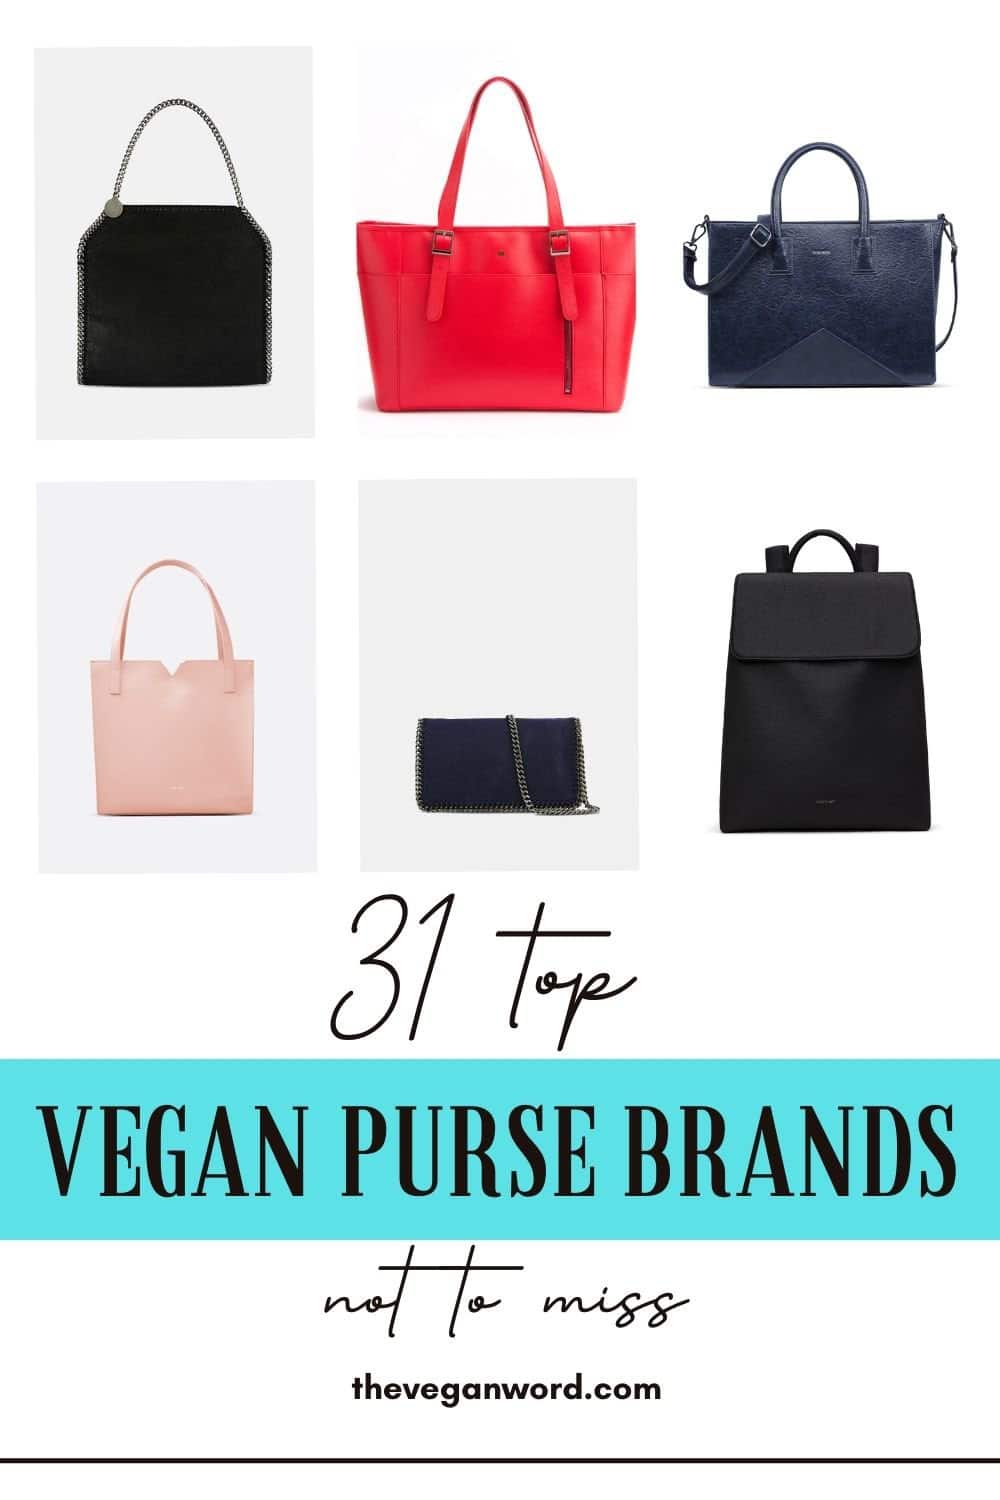 Pinterest image of different handbags with text that reads "31 top vegan purse brands not to miss"